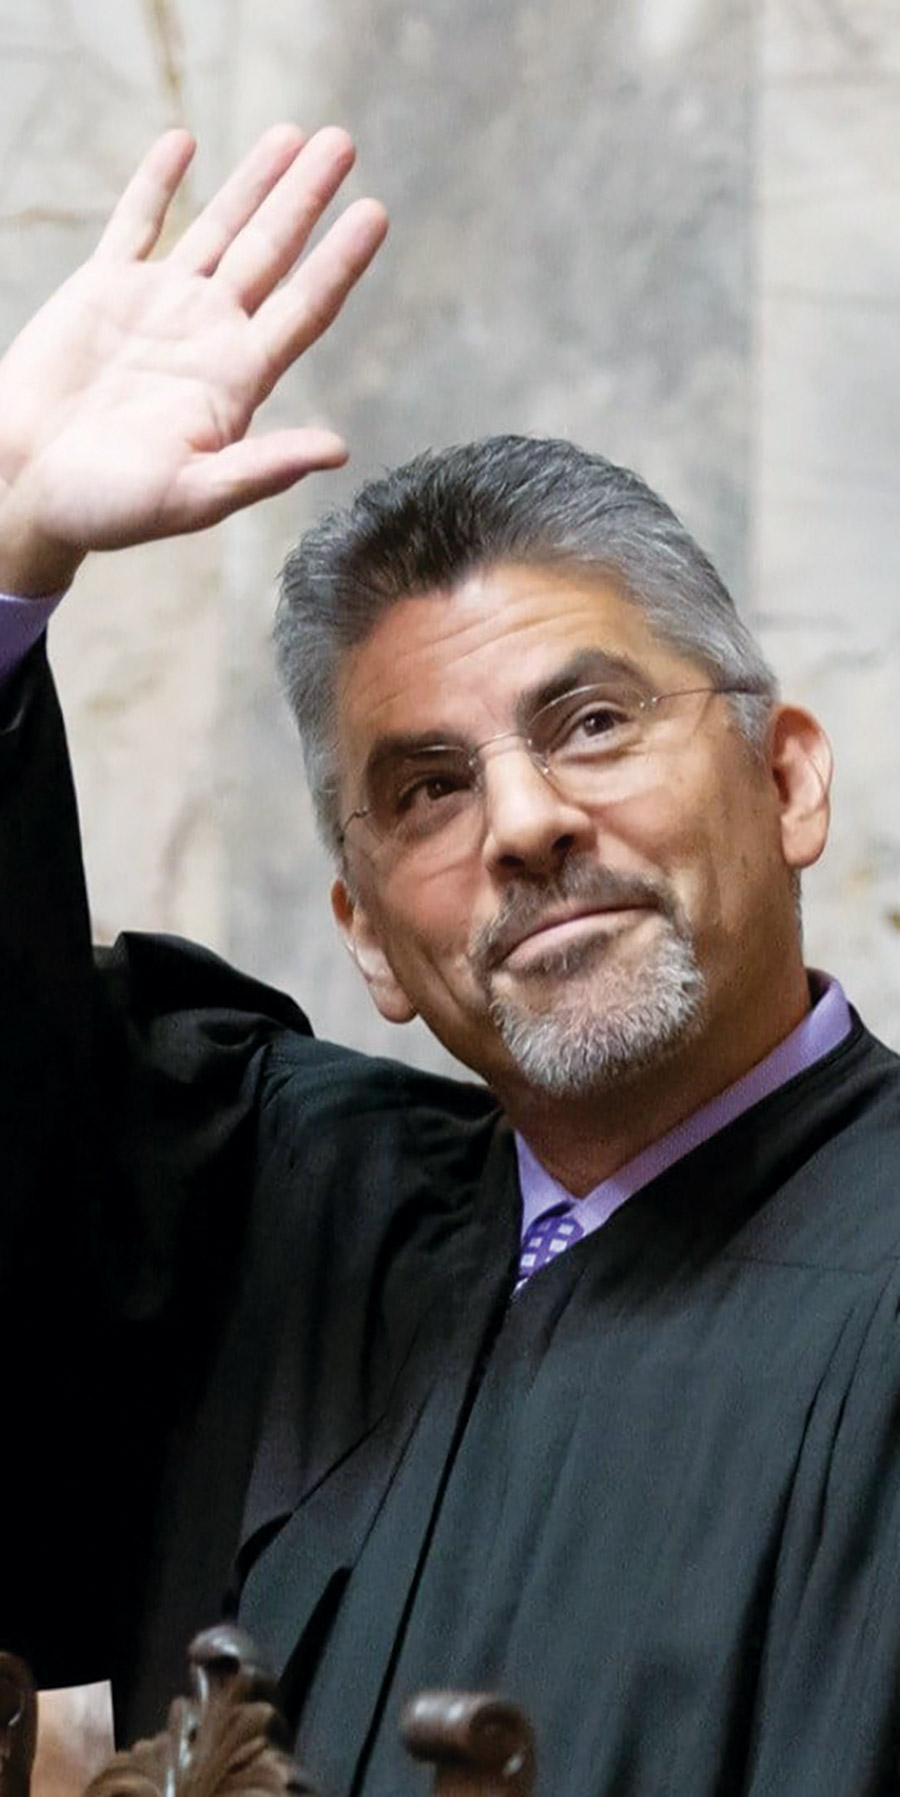 Portrait headshot close-up photograph view of Steven González grinning as he is in a black chief justice state supreme court gown with a light bright violet button-up dress shirt underneath with an equipped darker violet square shaped pattern tie while waving his right hand towards to what appears like an audience of some sort